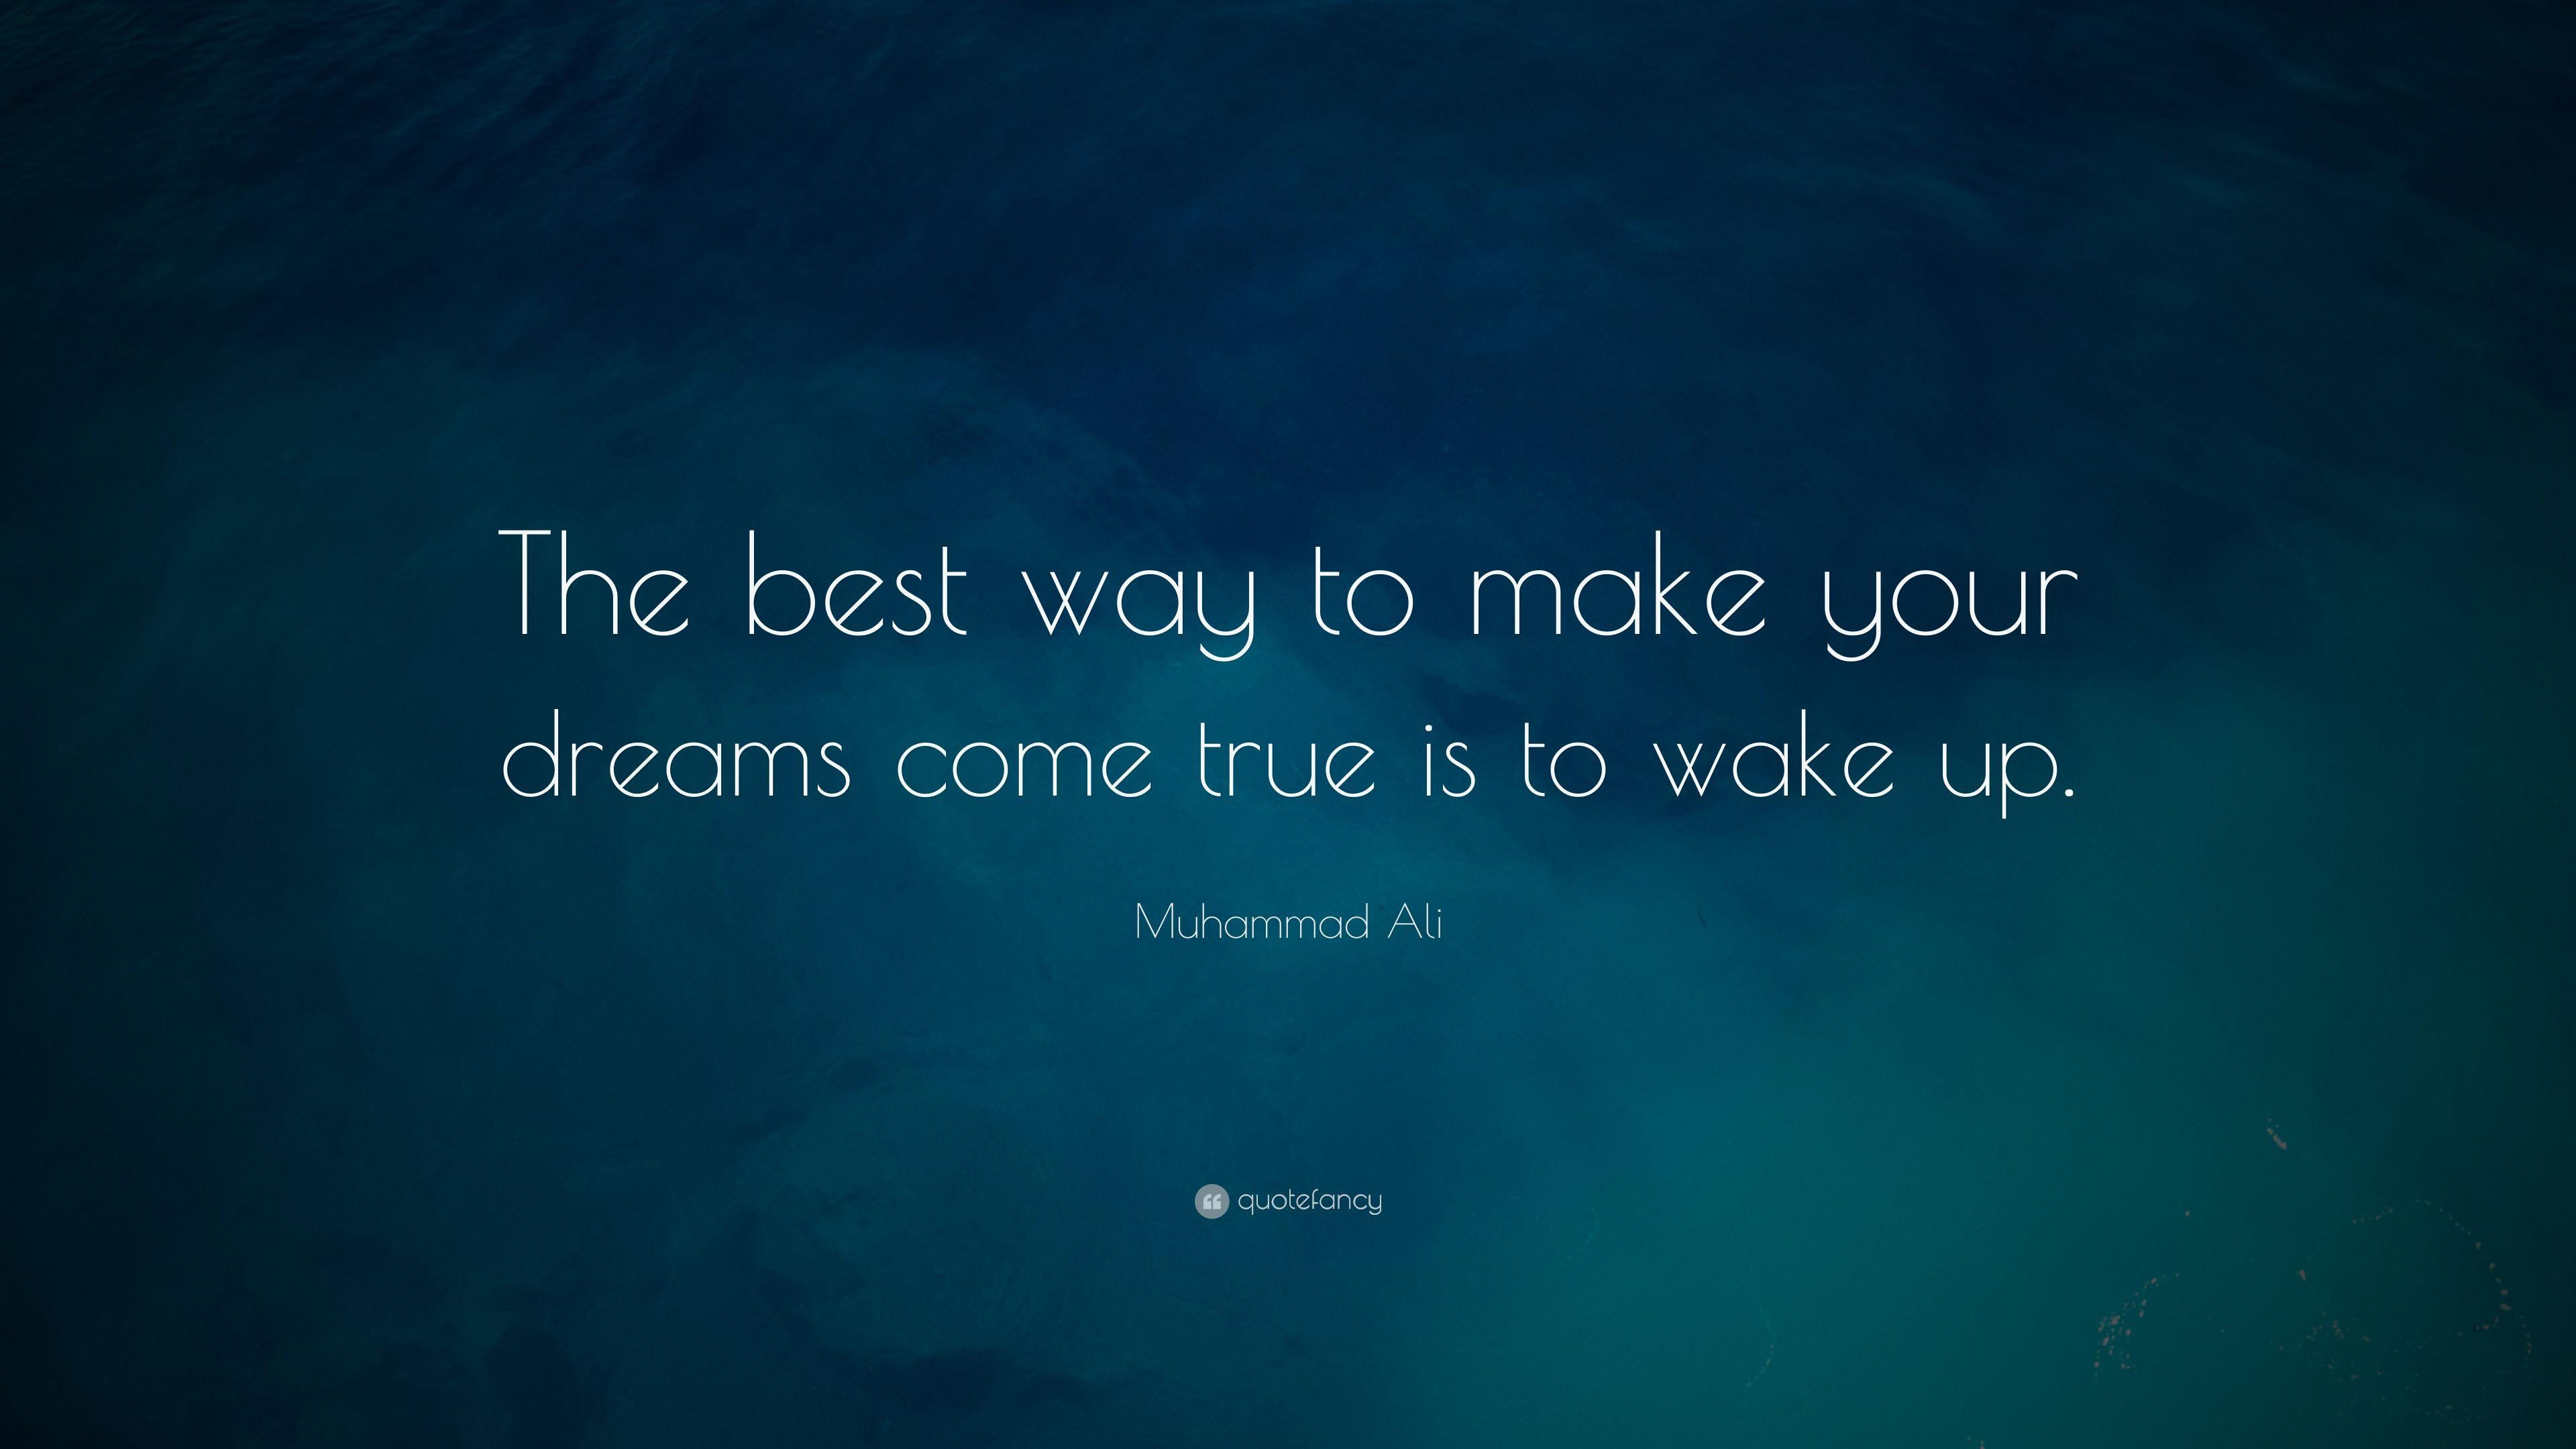 Muhammad Ali Quote: “The best way to make your dreams come true is